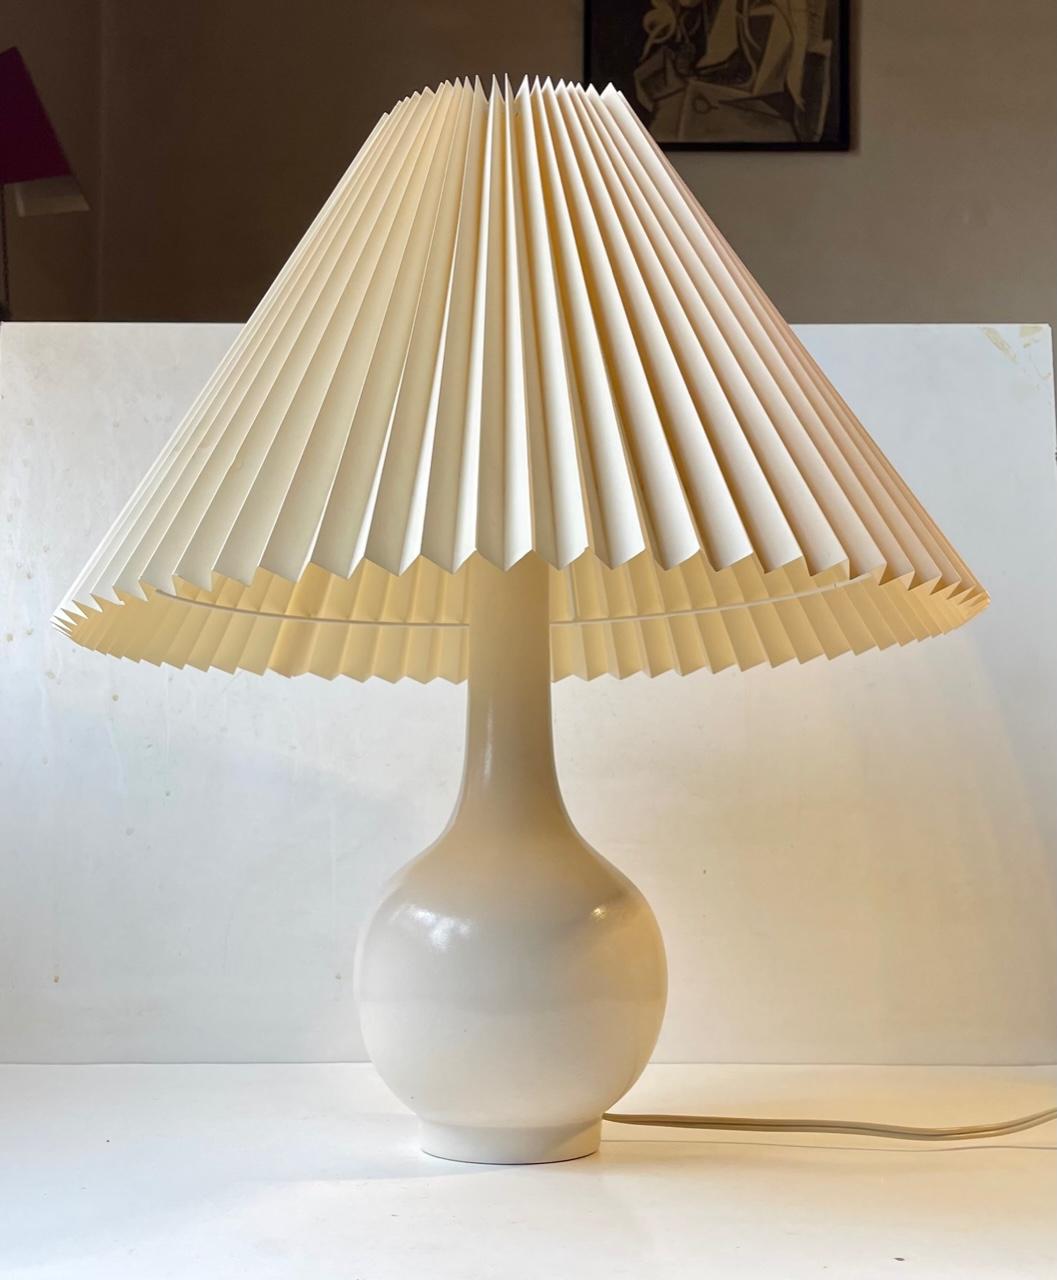 A classic Scandinavian table lamp in glazed ceramic. The color of the glaze is off-white or egg shell. Made in Denmark circa 1960 for C. Clausen in Svendborg. It features its original bakelite socket with built-in of/on switch. The off-white fluted